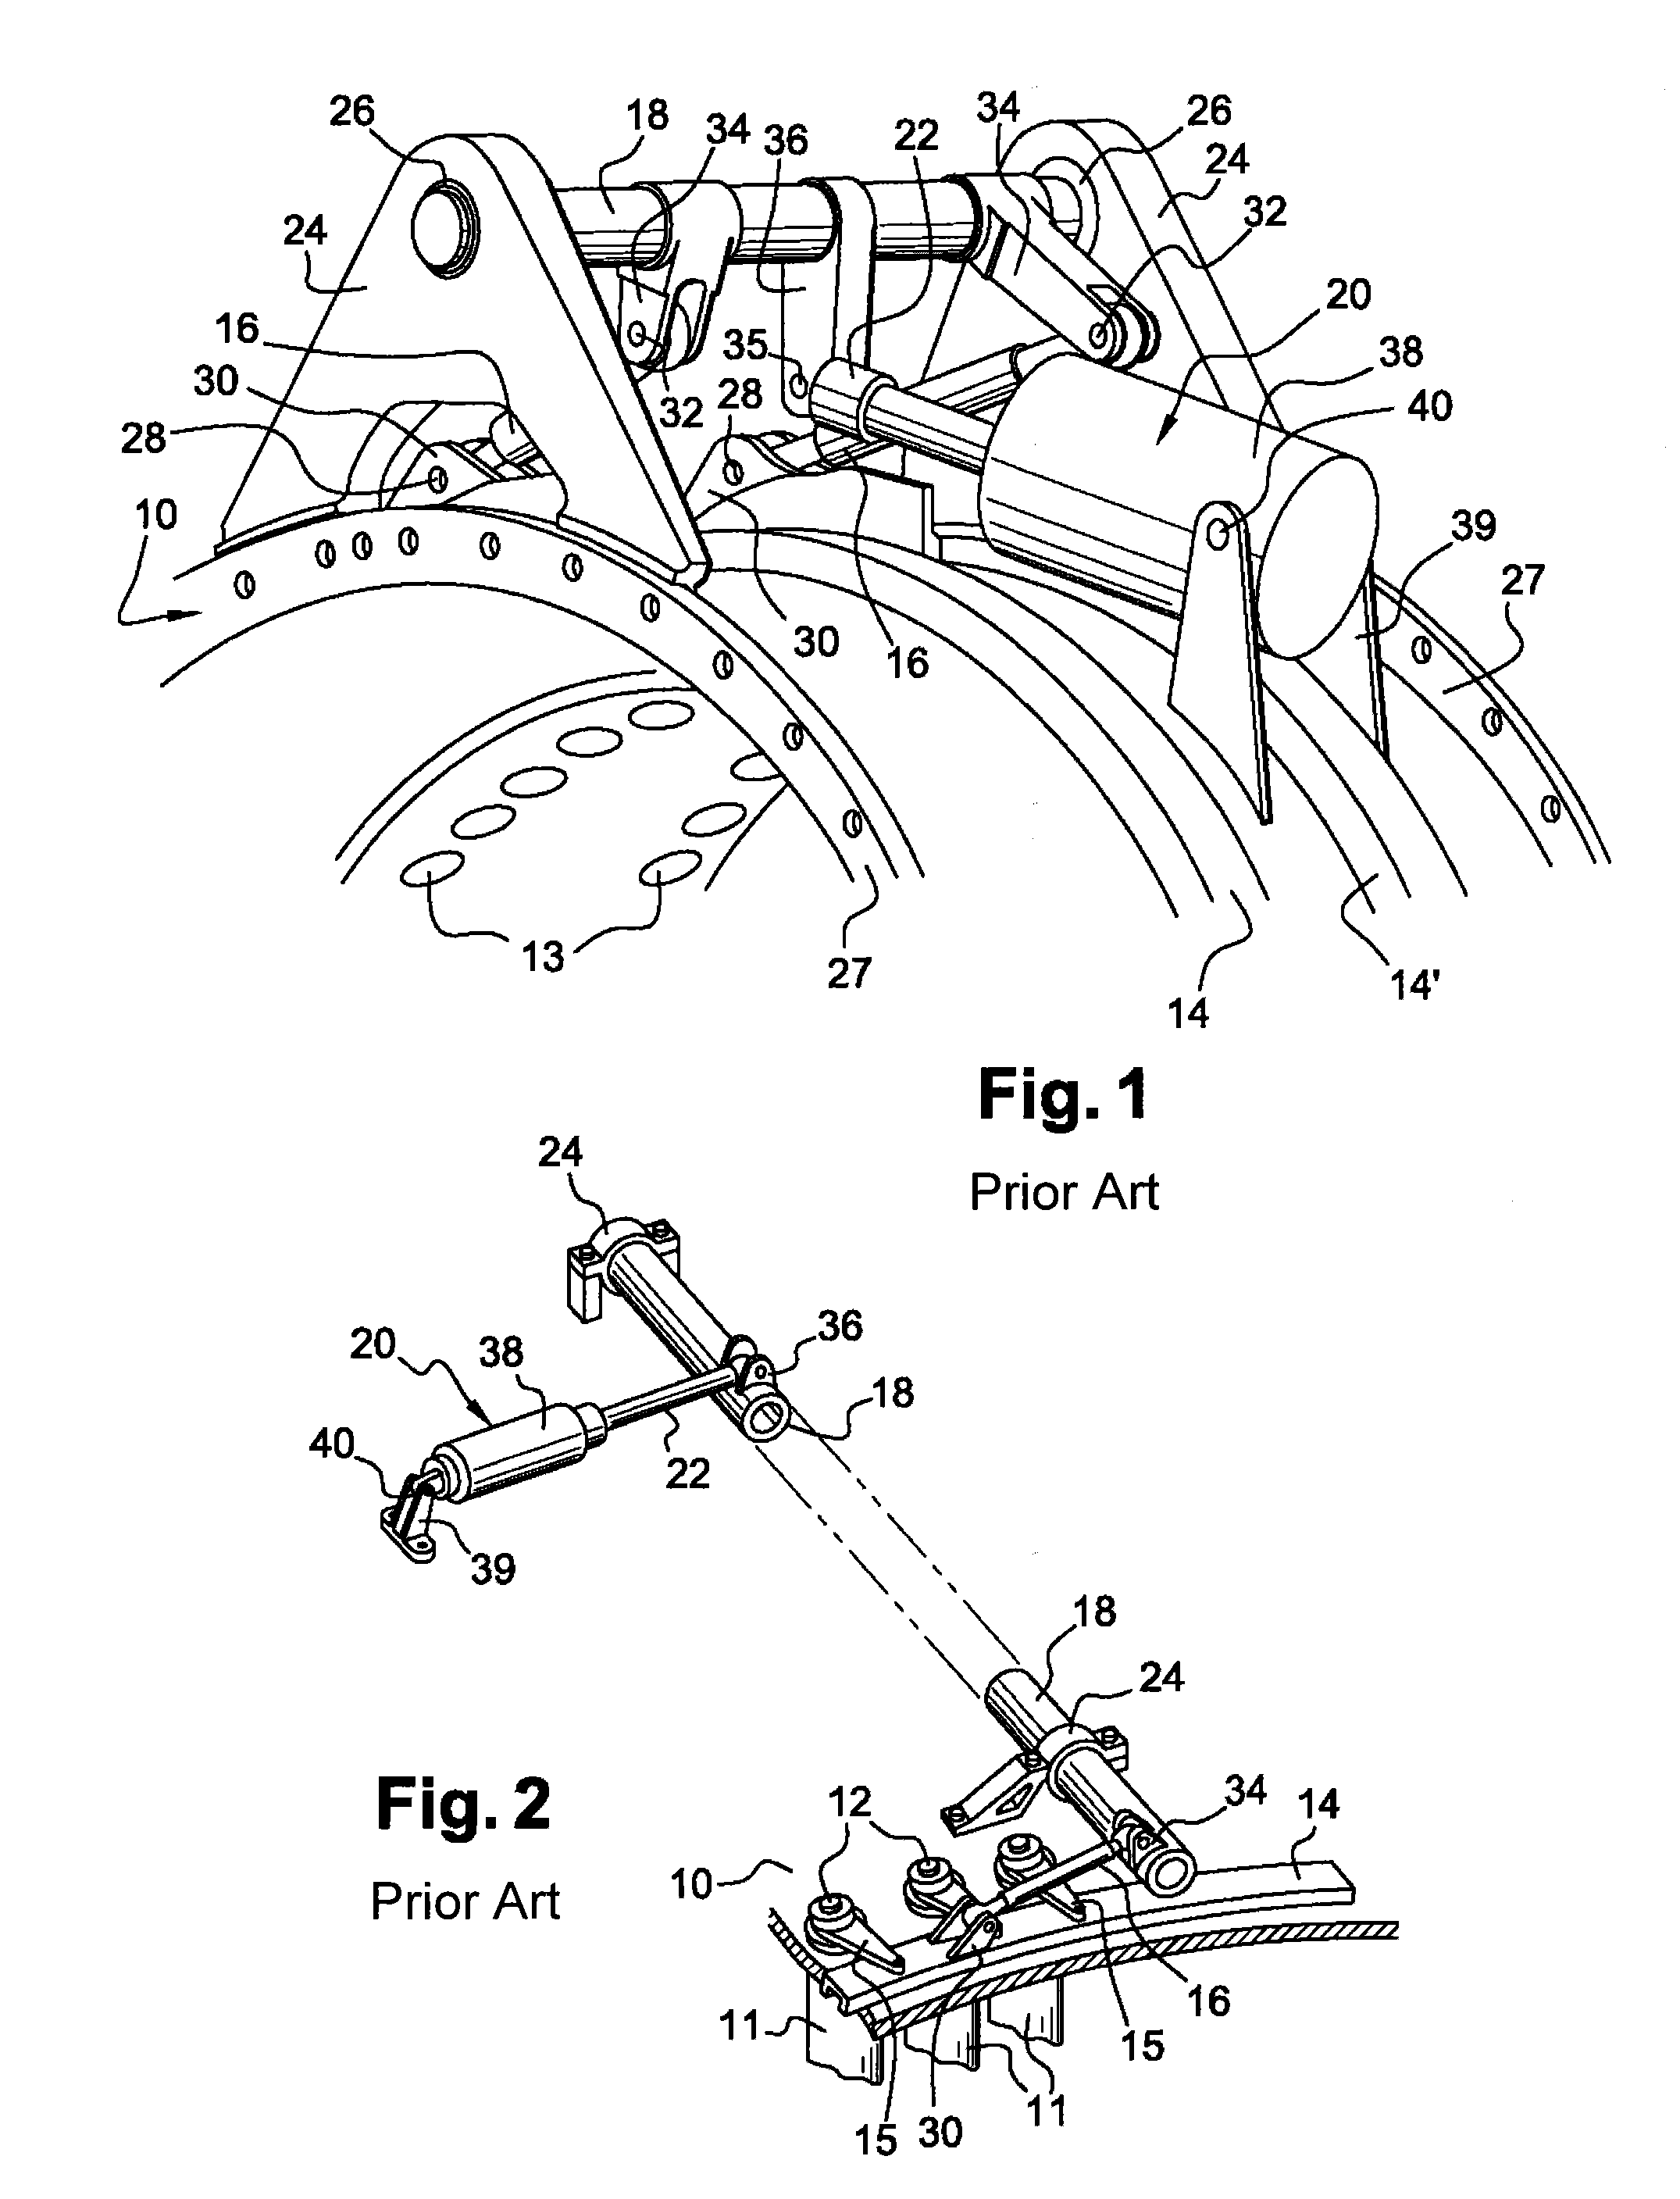 Device for controlling variable-pitch blades in a turbomachine compressor